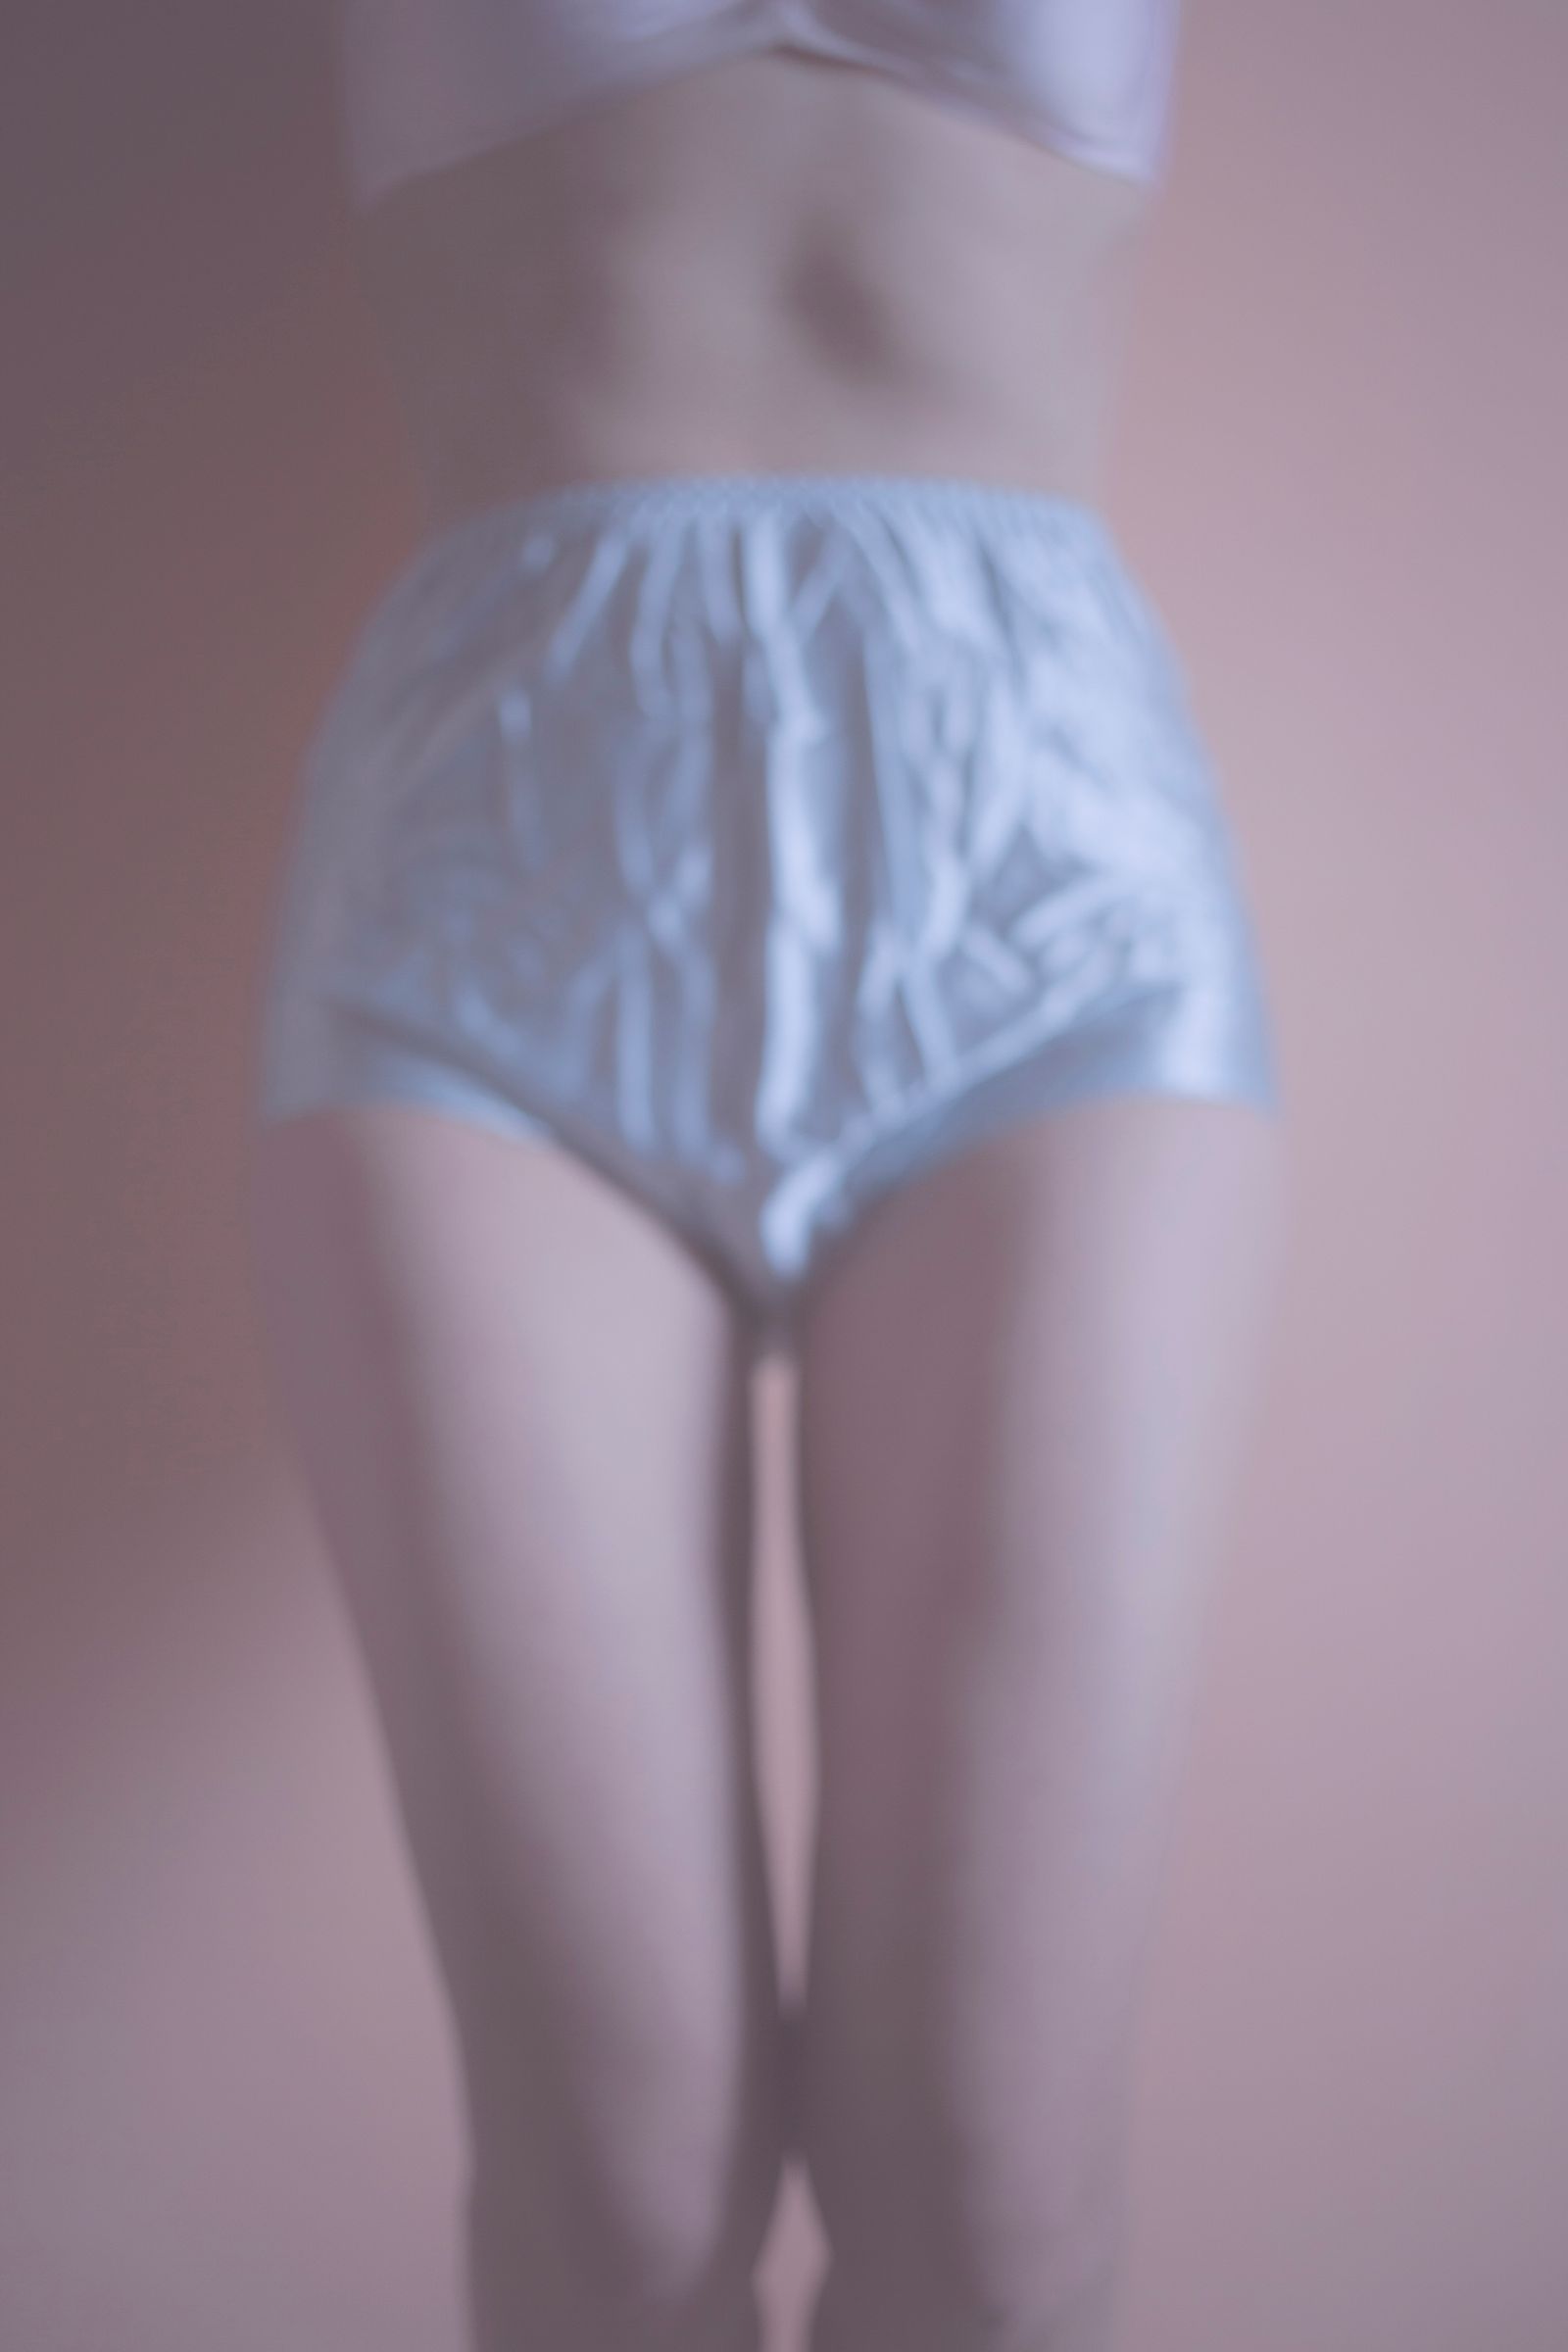 © Marta Viola - Image from the Cotton Candy photography project